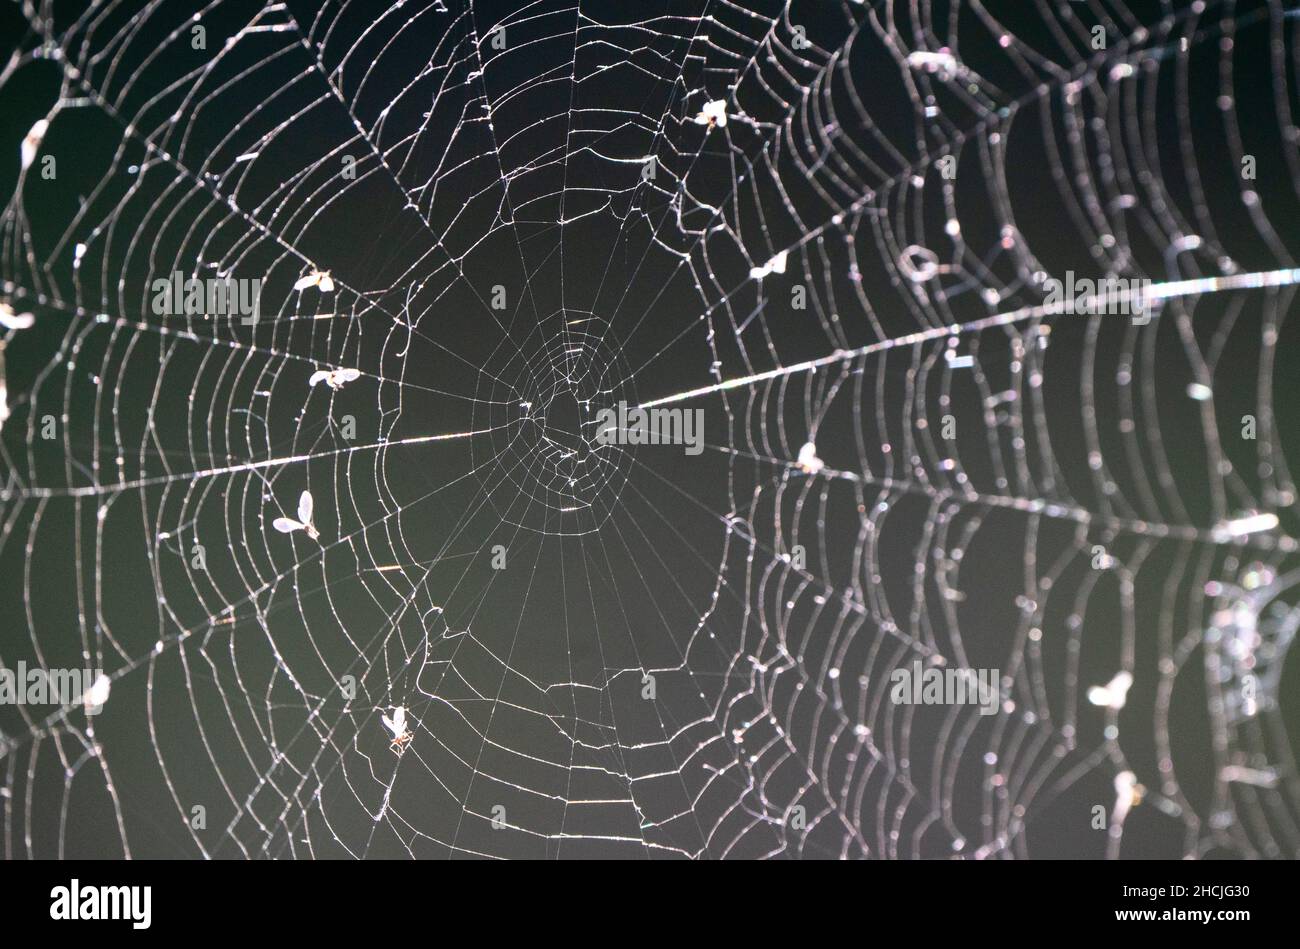 Spider Web close up light shining great detail Stock Photo